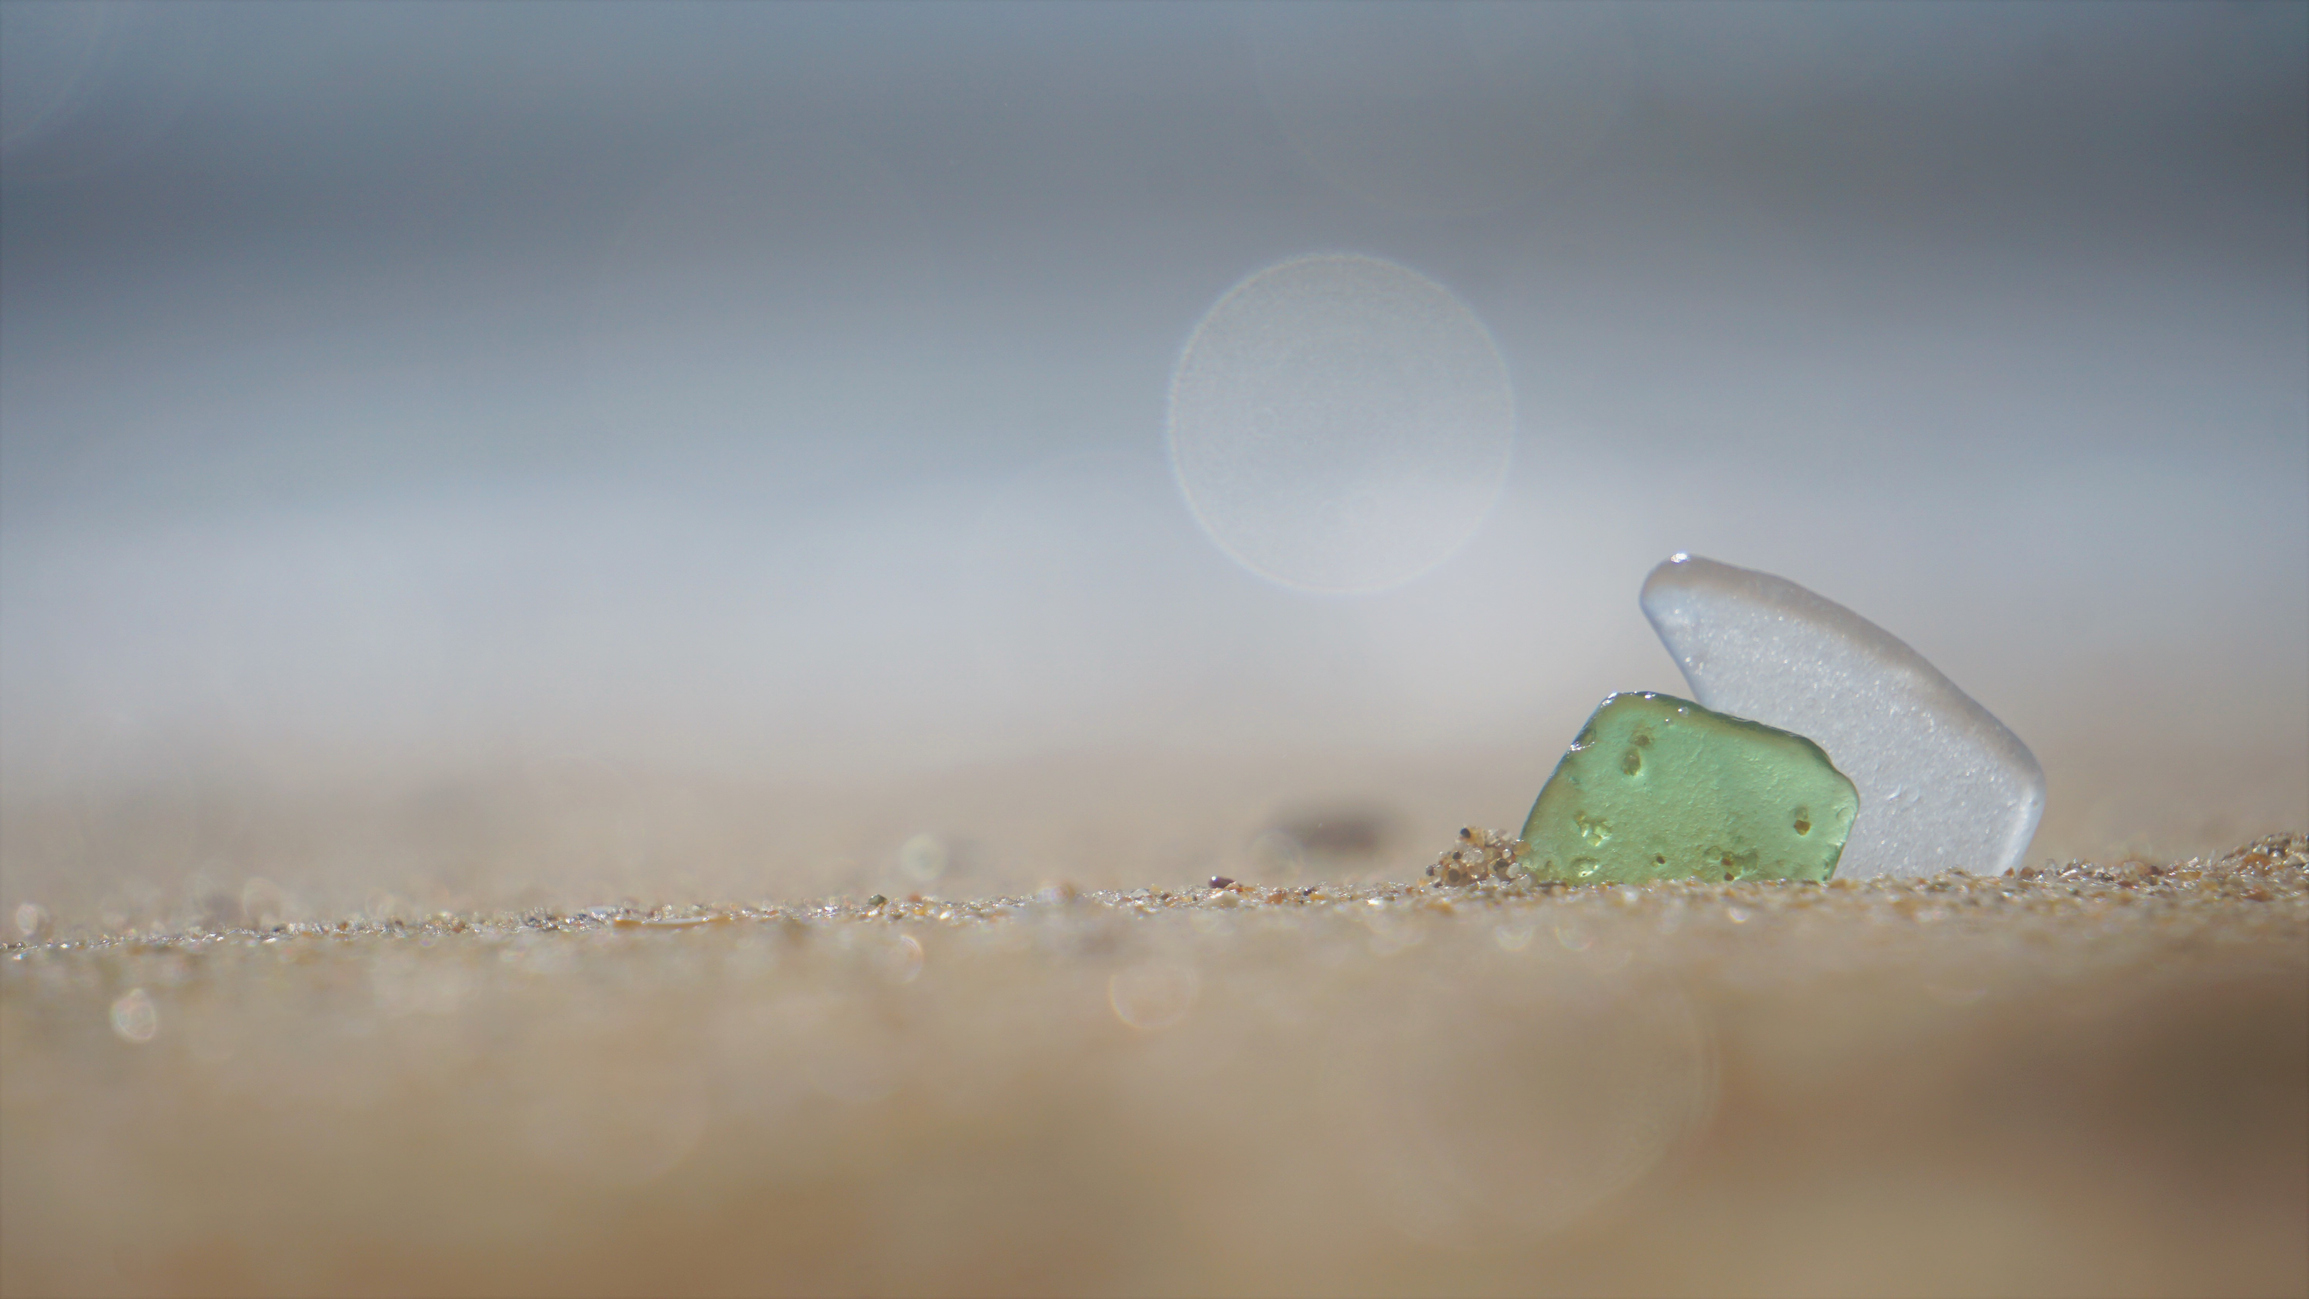 Seaglass embedded in sand.